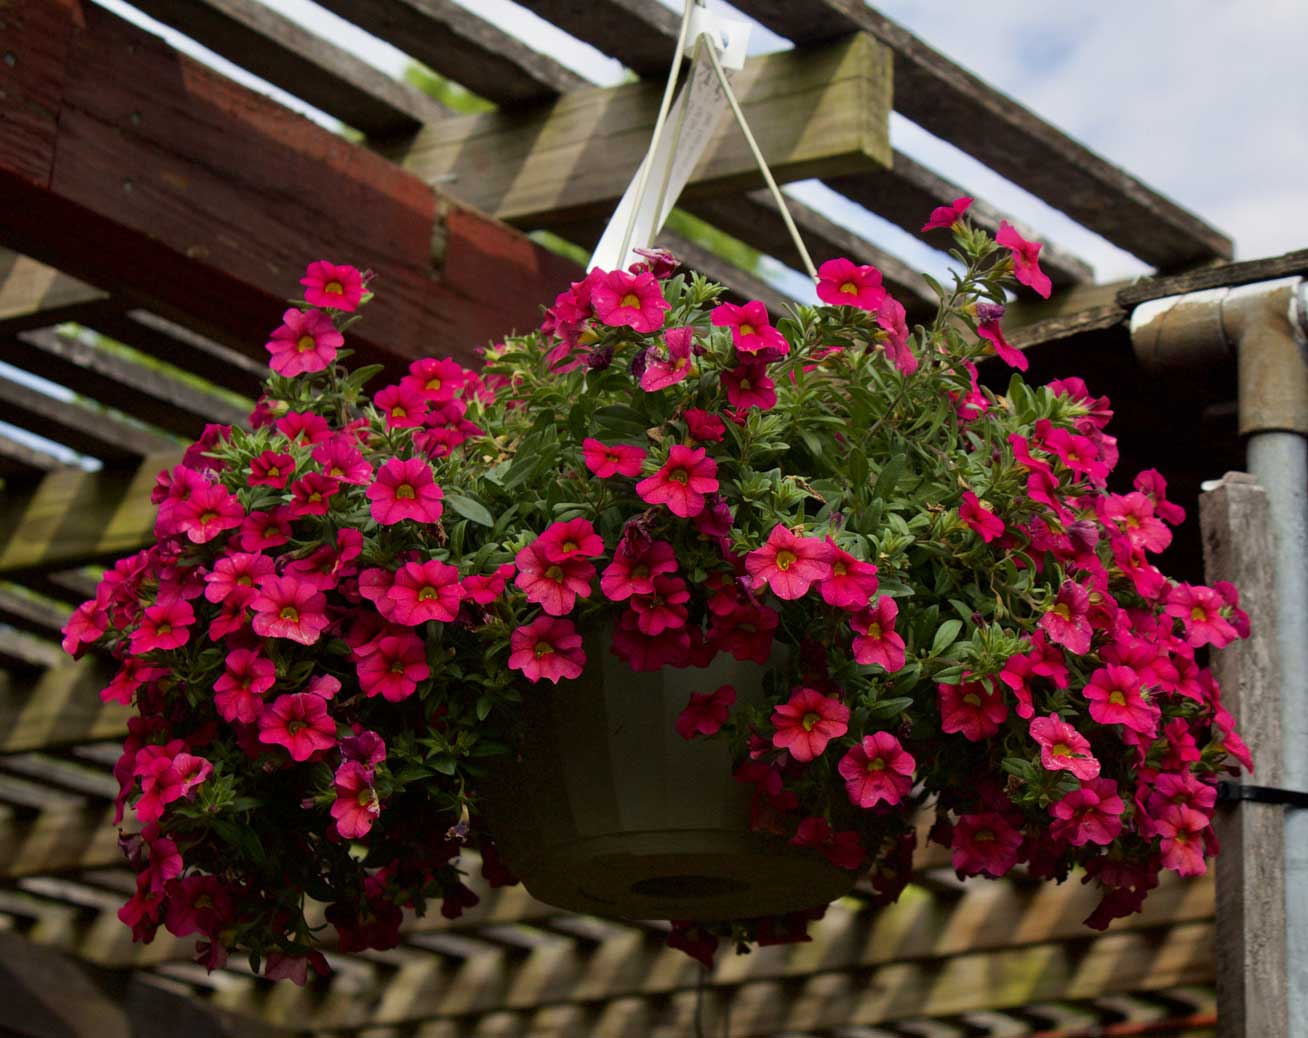 Hanging Baskets at Goffle Brook Farms